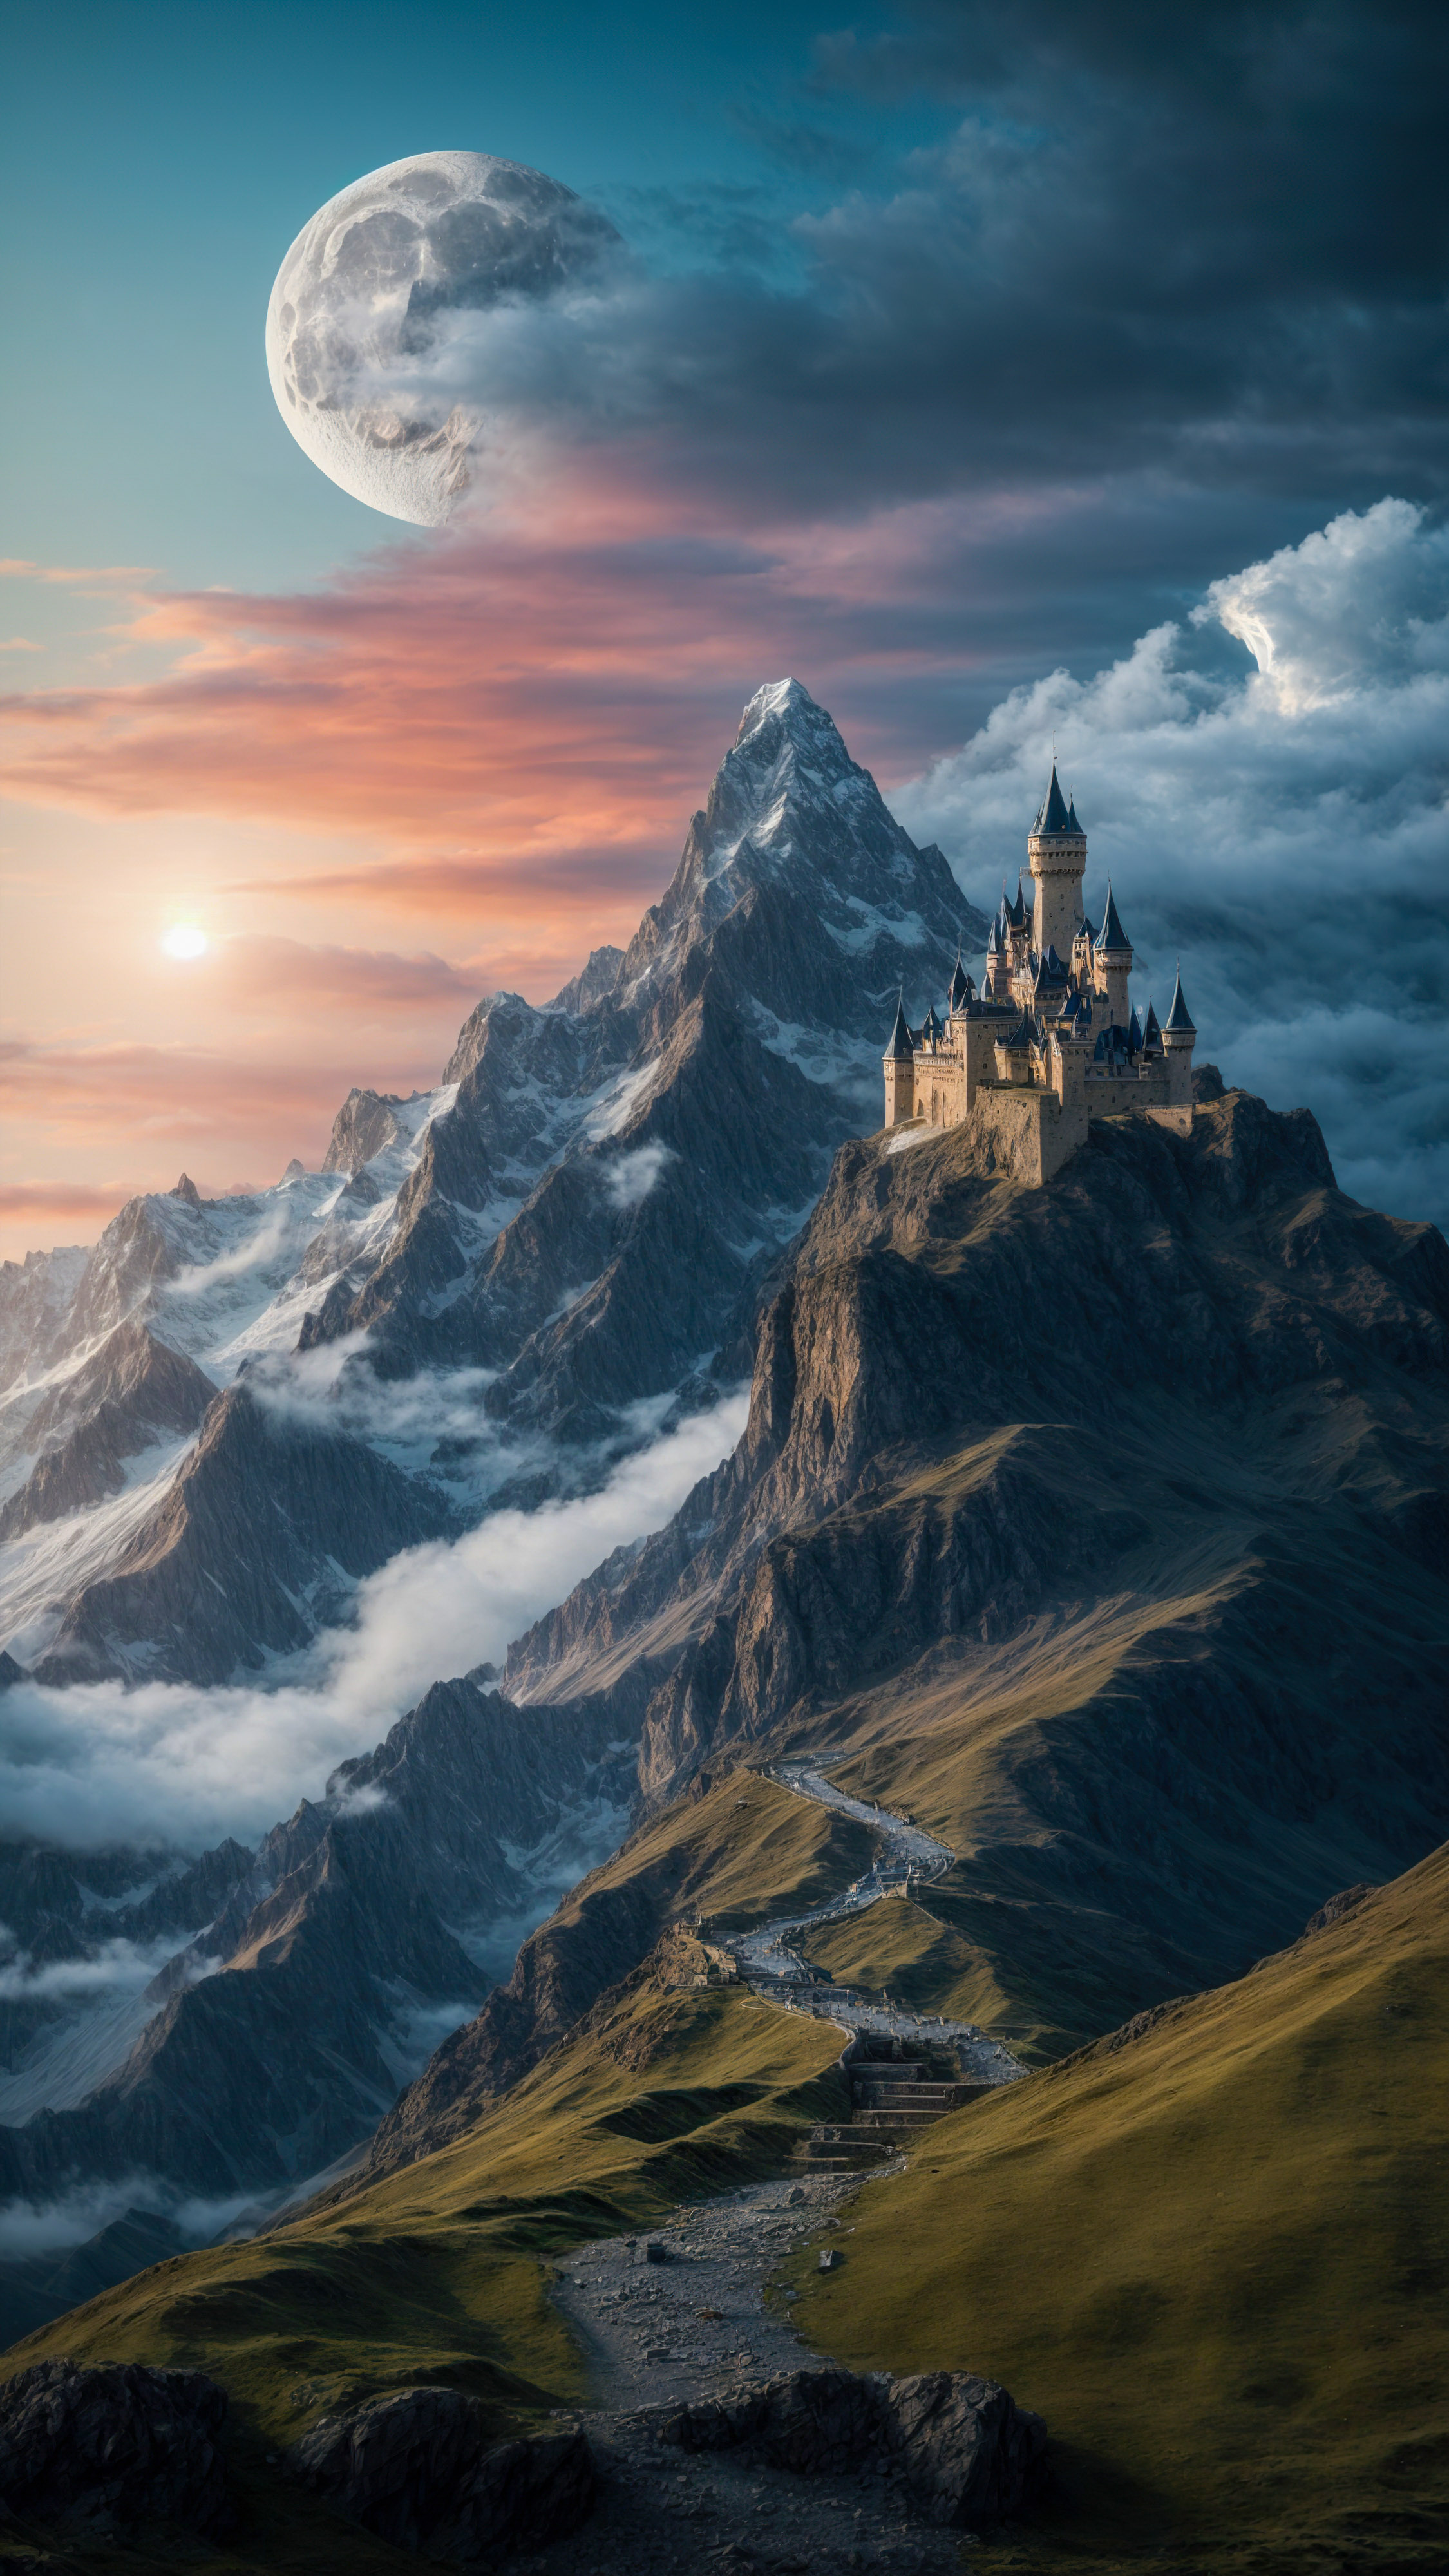 Get mesmerized with cool backgrounds featuring a fantasy mountain with a castle and a dragon, under a magical sky and a moon.